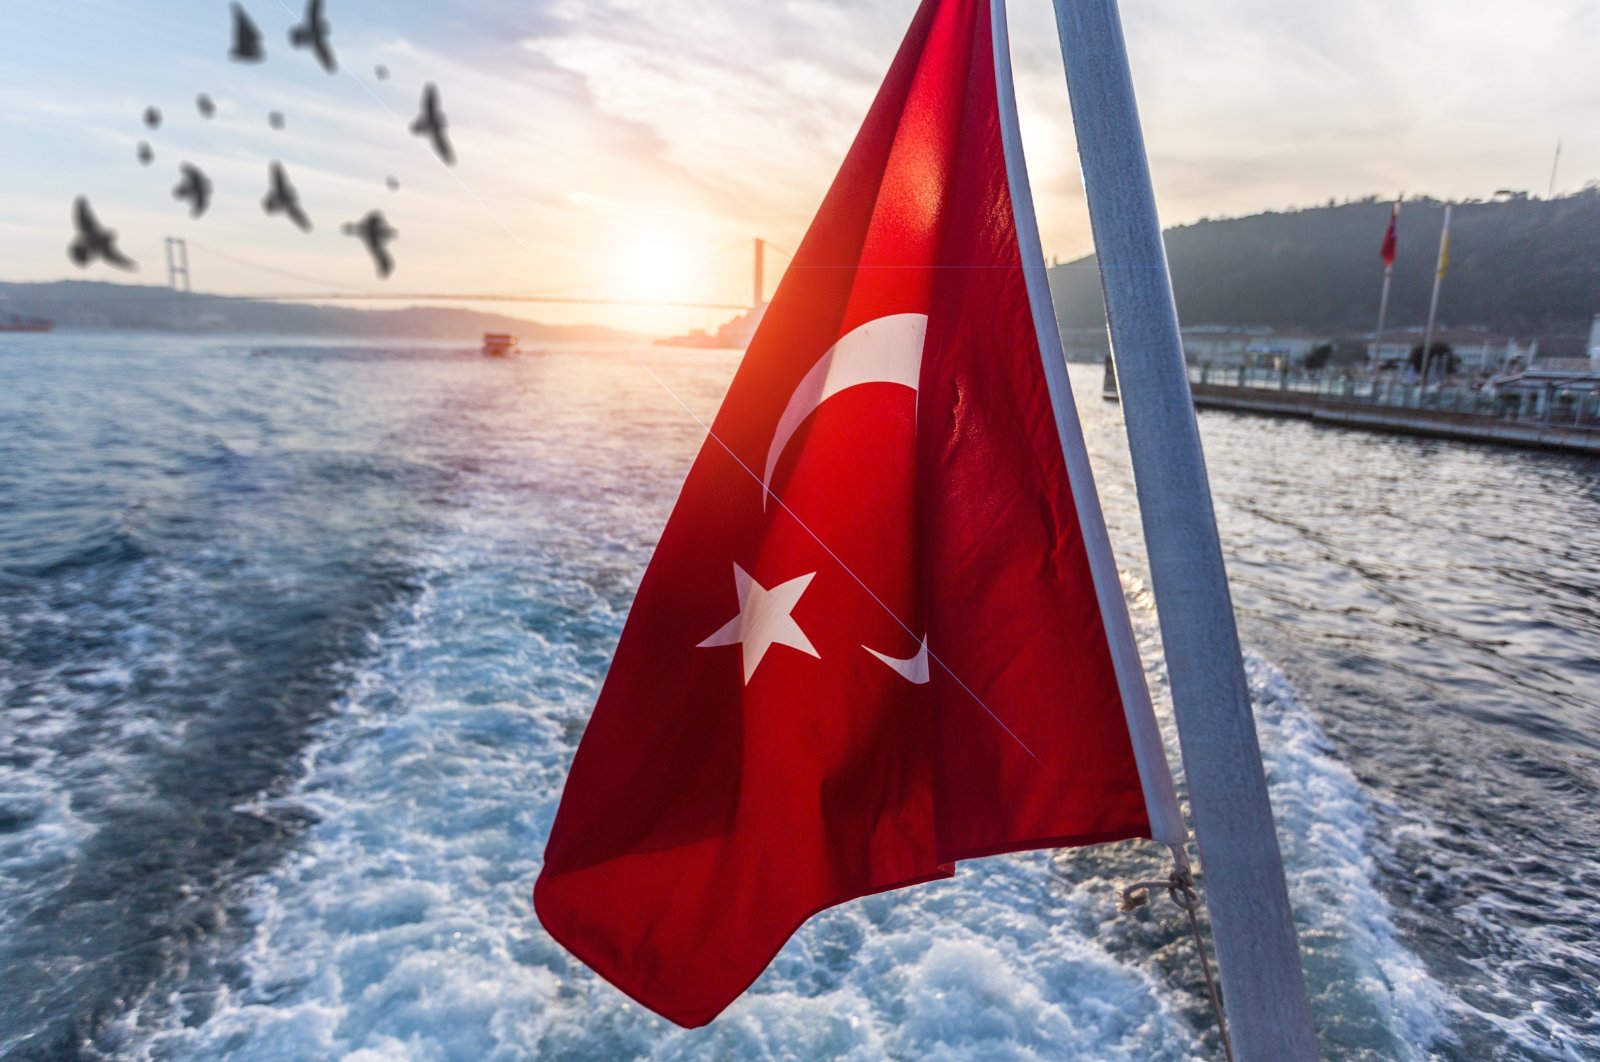 The Turkish flag waves from a ferry on the Bosporus in Istanbul, Turkey, July 15, 2022 (Shutterstock Photo)